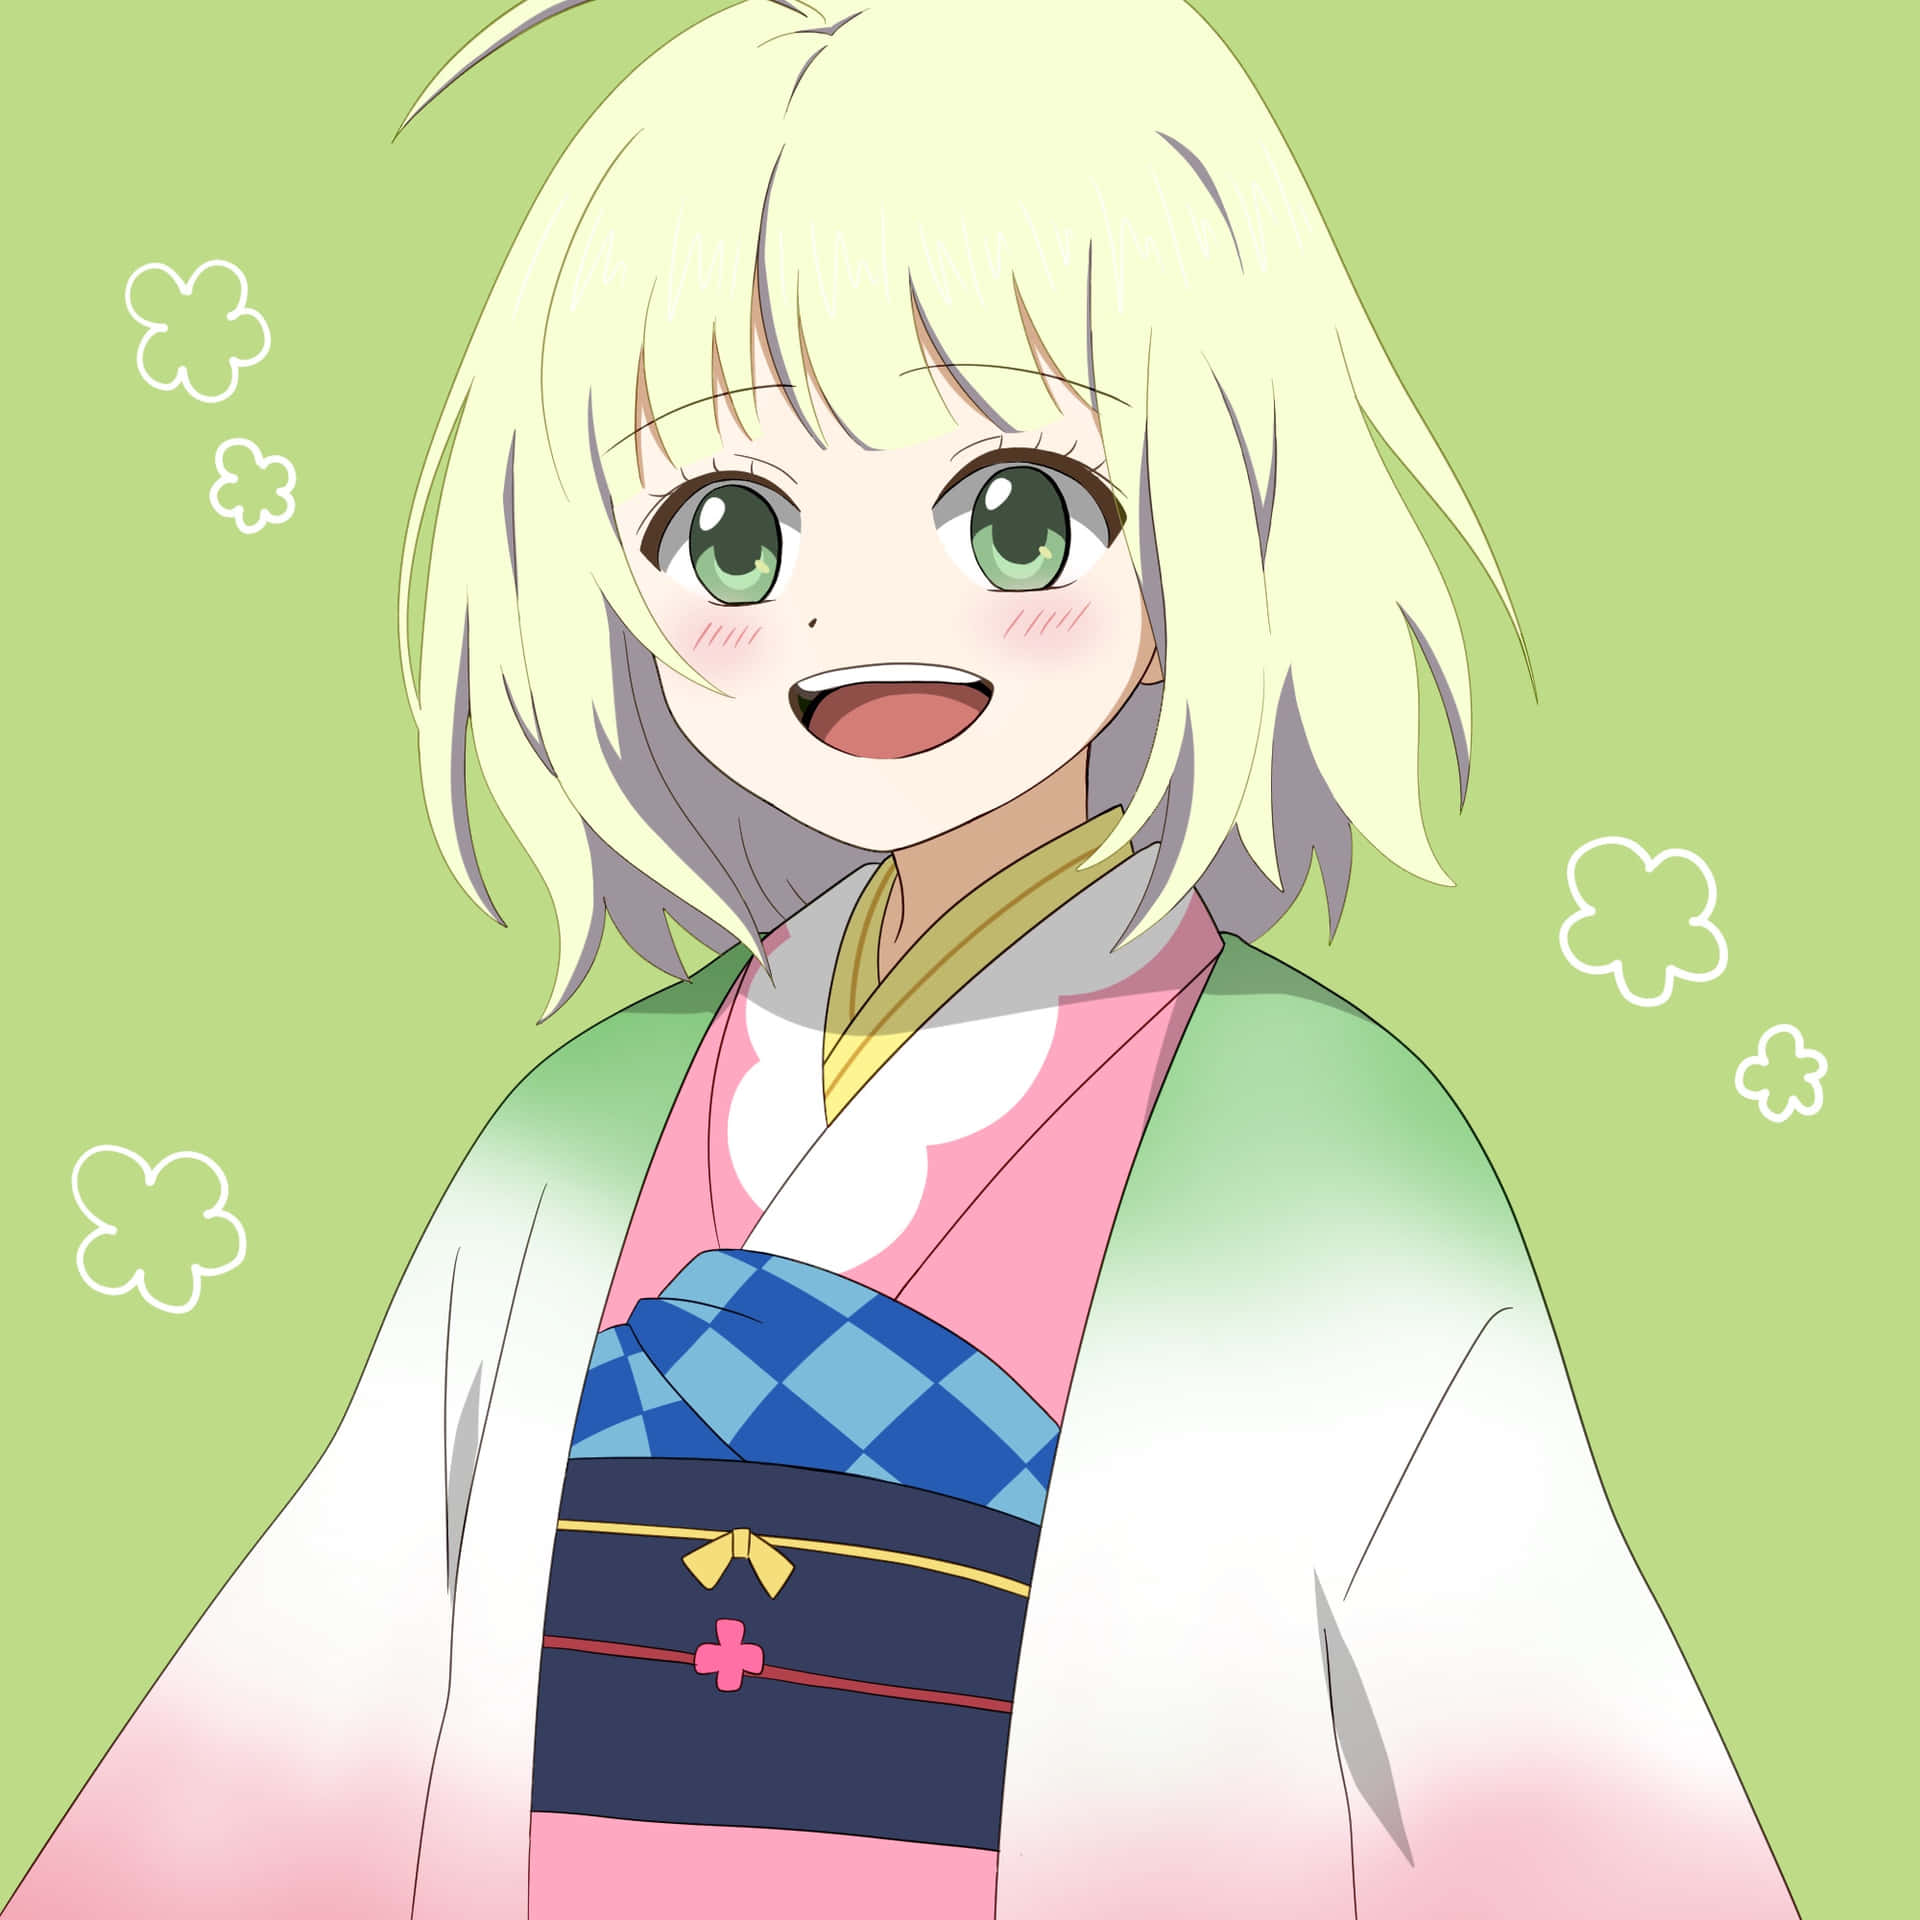 Shiemi Moriyama Displaying Her Exorcist Abilities With A Serene Look On Her Face Against A Luminous Backdrop. Wallpaper